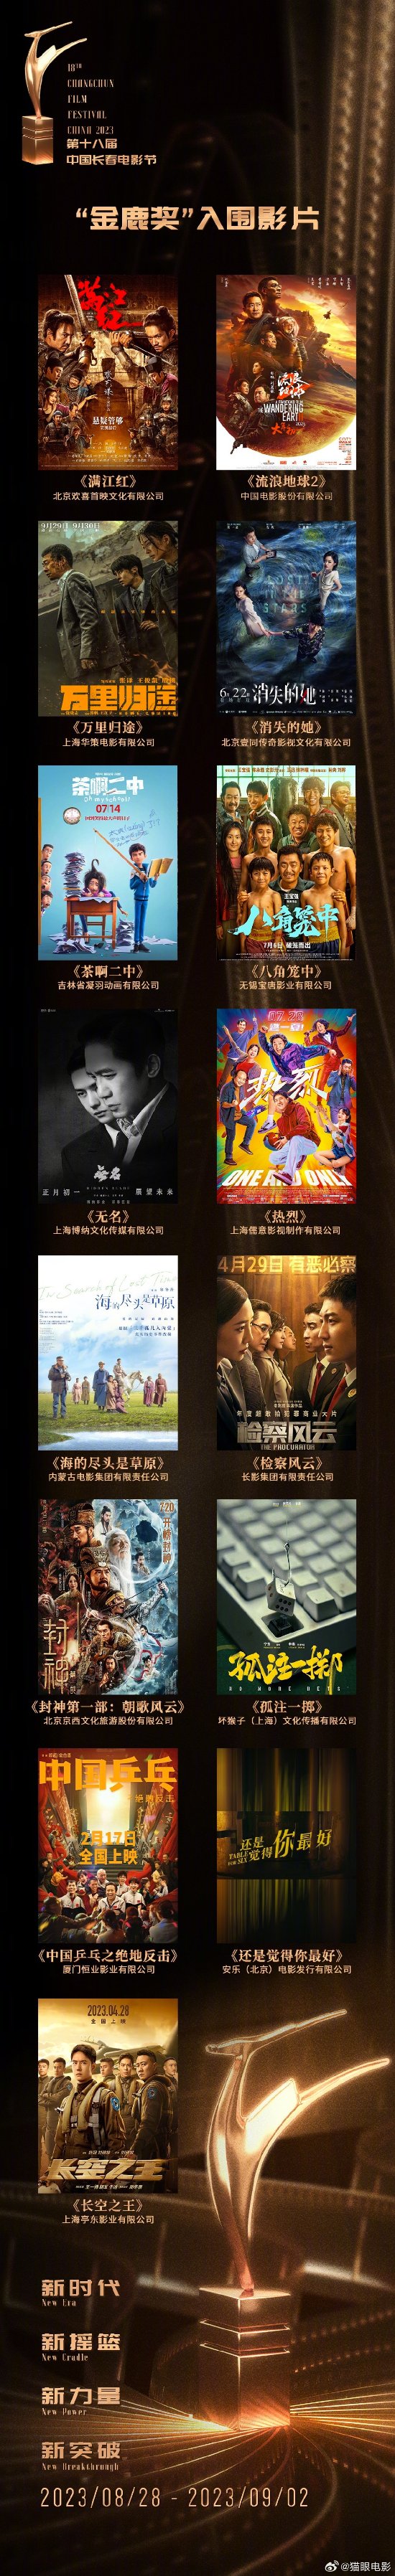 Revealed! Nominee List Unveiled for Changchun Film Festival: 